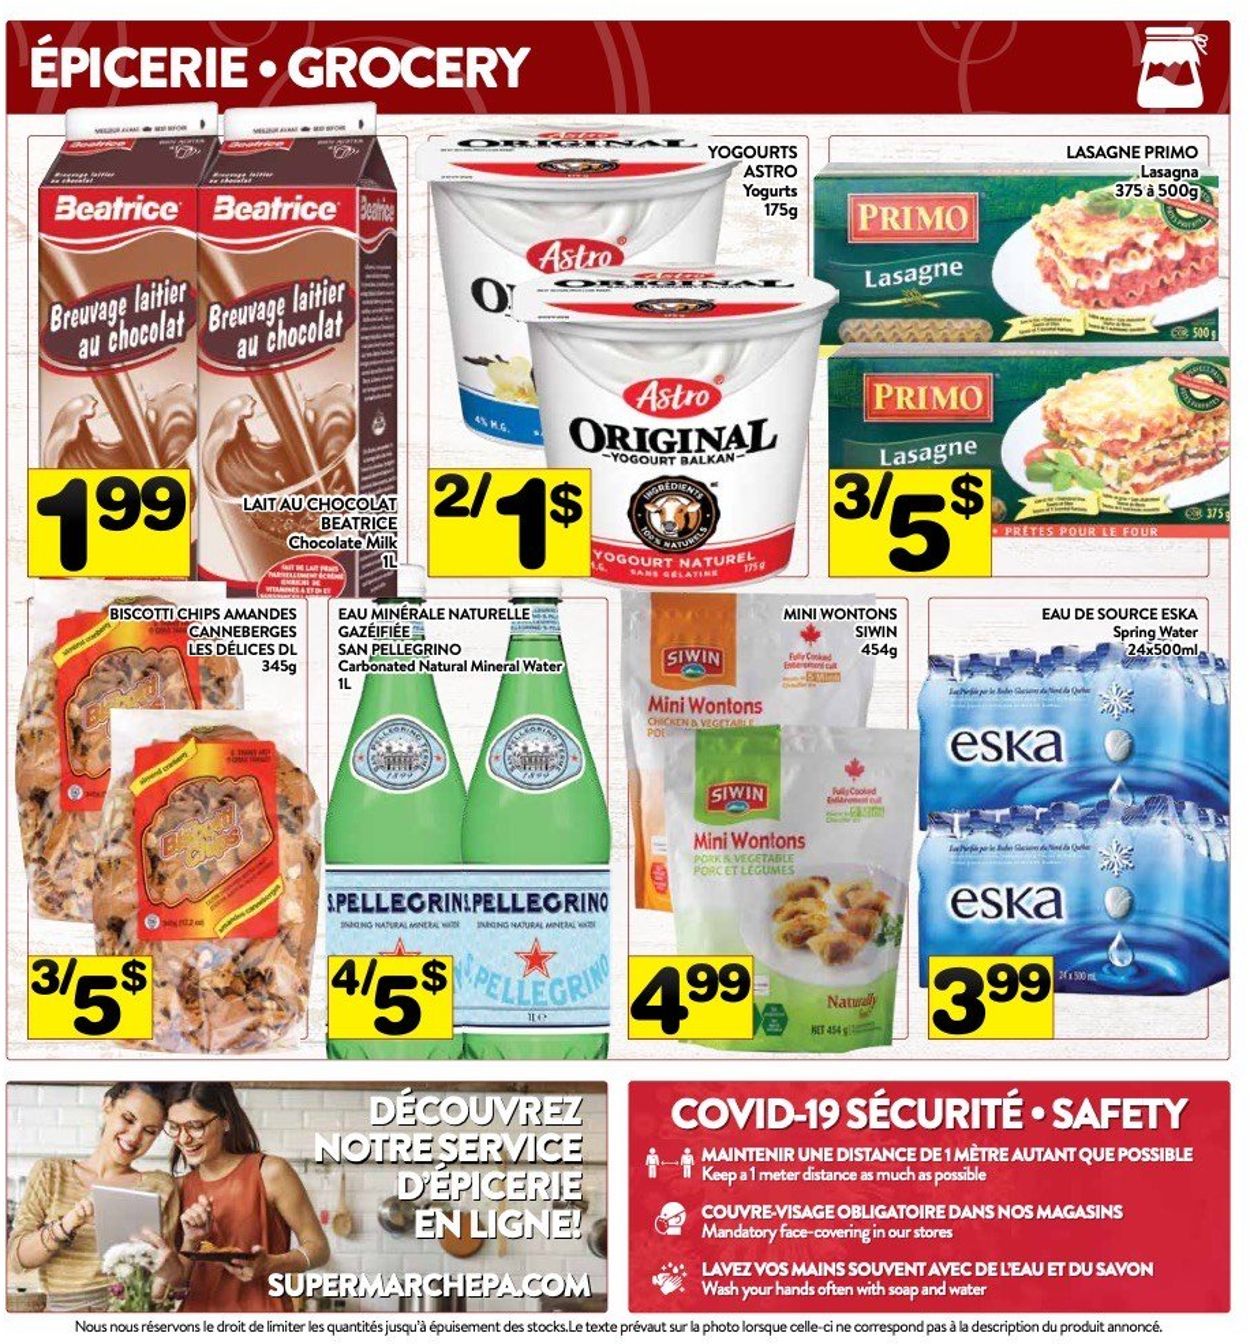 PA Supermarché Flyer from 08/30/2021